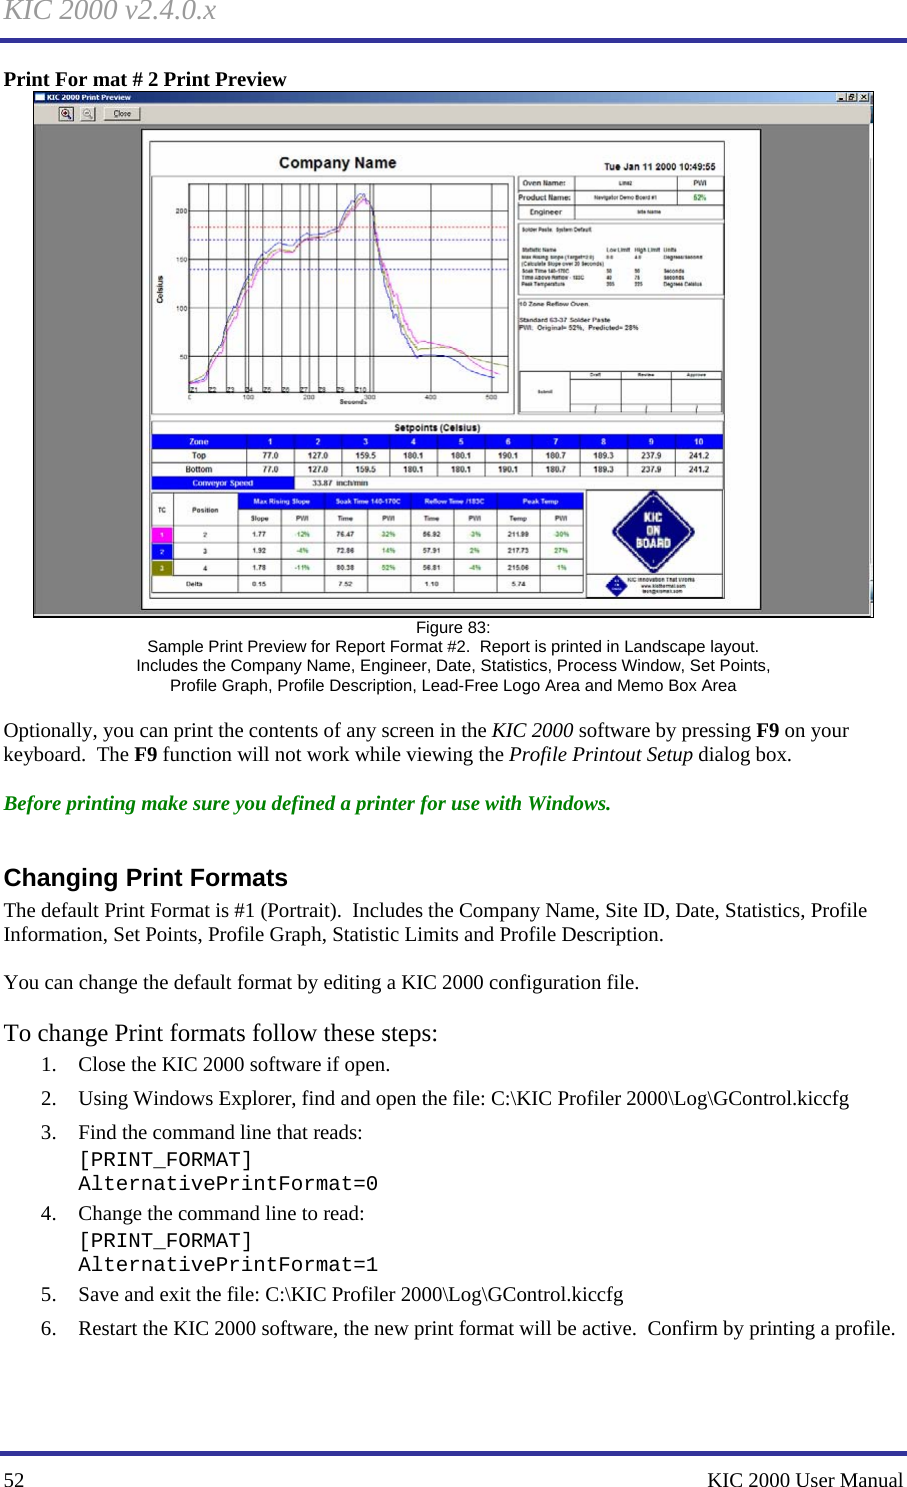 KIC 2000 v2.4.0.x 52    KIC 2000 User Manual Print For mat # 2 Print Preview  Figure 83: Sample Print Preview for Report Format #2.  Report is printed in Landscape layout. Includes the Company Name, Engineer, Date, Statistics, Process Window, Set Points, Profile Graph, Profile Description, Lead-Free Logo Area and Memo Box Area  Optionally, you can print the contents of any screen in the KIC 2000 software by pressing F9 on your keyboard.  The F9 function will not work while viewing the Profile Printout Setup dialog box.  Before printing make sure you defined a printer for use with Windows.  Changing Print Formats The default Print Format is #1 (Portrait).  Includes the Company Name, Site ID, Date, Statistics, Profile Information, Set Points, Profile Graph, Statistic Limits and Profile Description.  You can change the default format by editing a KIC 2000 configuration file.    To change Print formats follow these steps: 1. Close the KIC 2000 software if open. 2. Using Windows Explorer, find and open the file: C:\KIC Profiler 2000\Log\GControl.kiccfg  3. Find the command line that reads:   [PRINT_FORMAT] AlternativePrintFormat=0 4. Change the command line to read:  [PRINT_FORMAT] AlternativePrintFormat=1 5. Save and exit the file: C:\KIC Profiler 2000\Log\GControl.kiccfg  6. Restart the KIC 2000 software, the new print format will be active.  Confirm by printing a profile.    